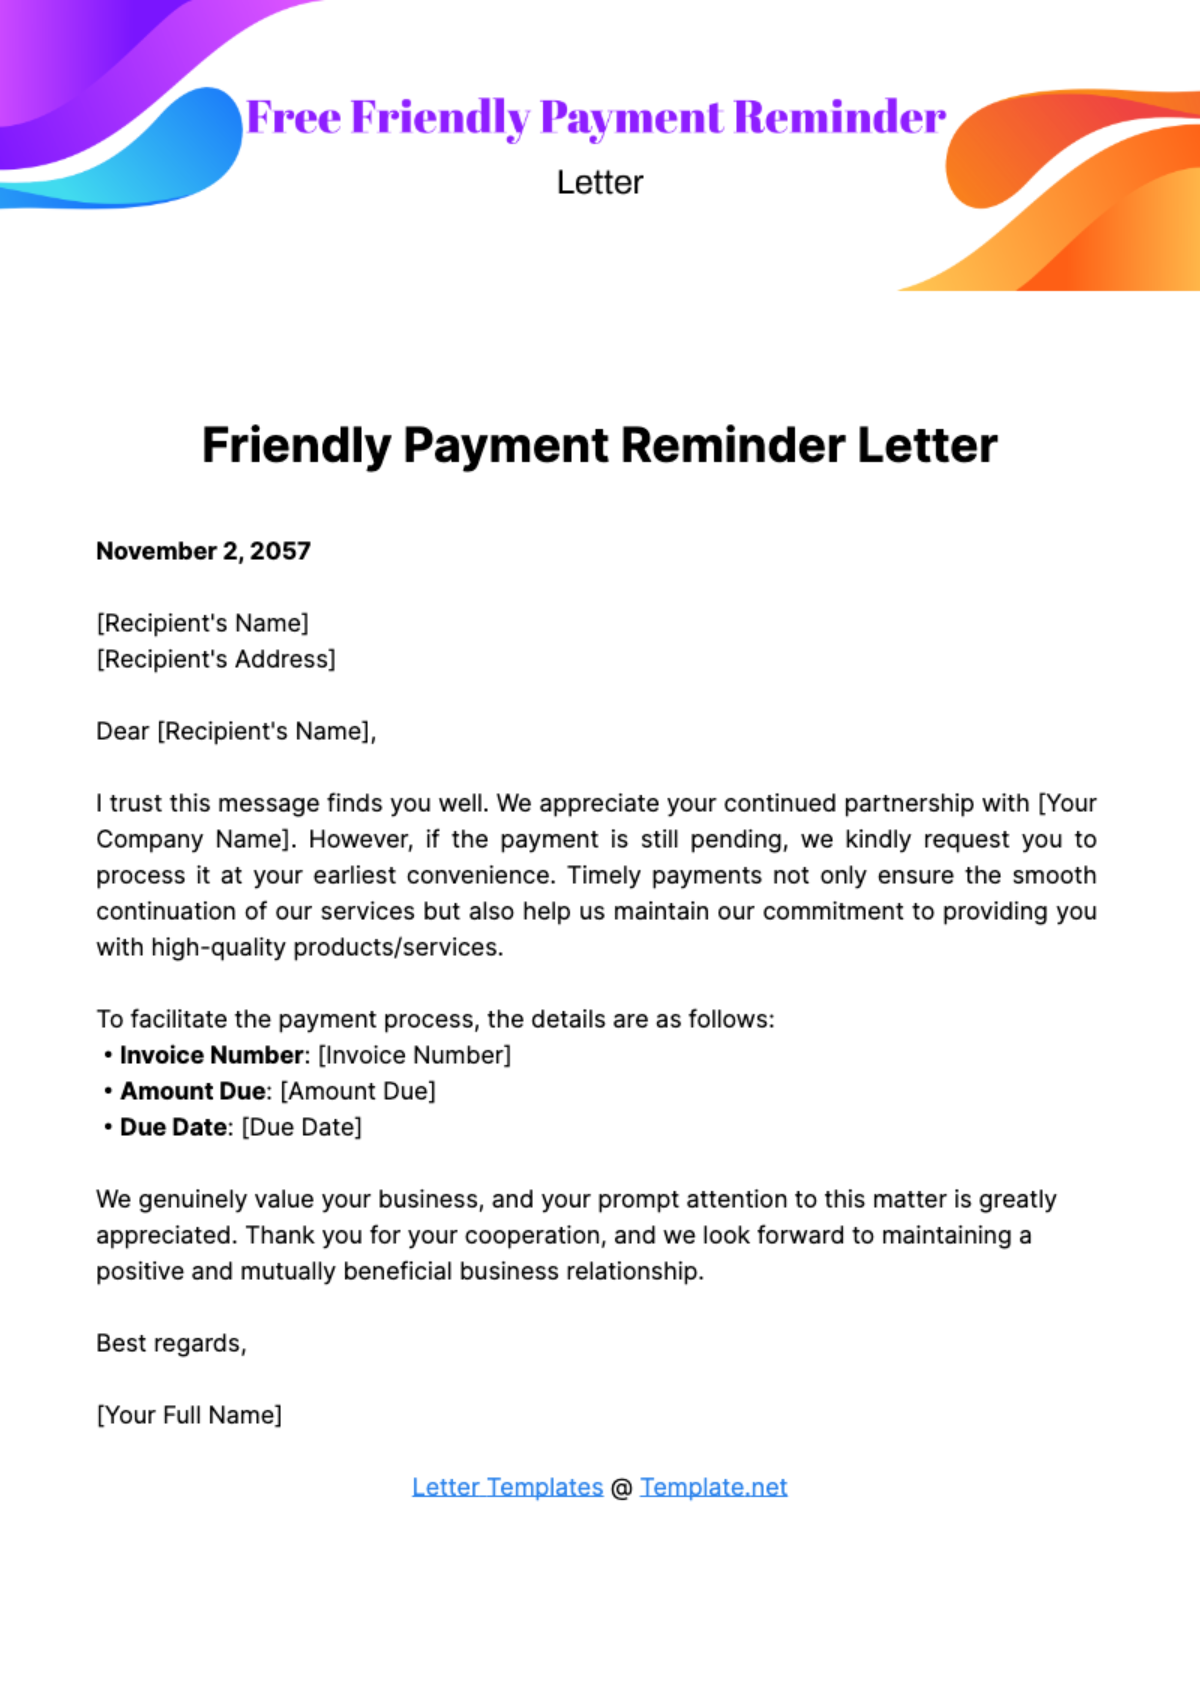 Friendly Payment Reminder Letter Template